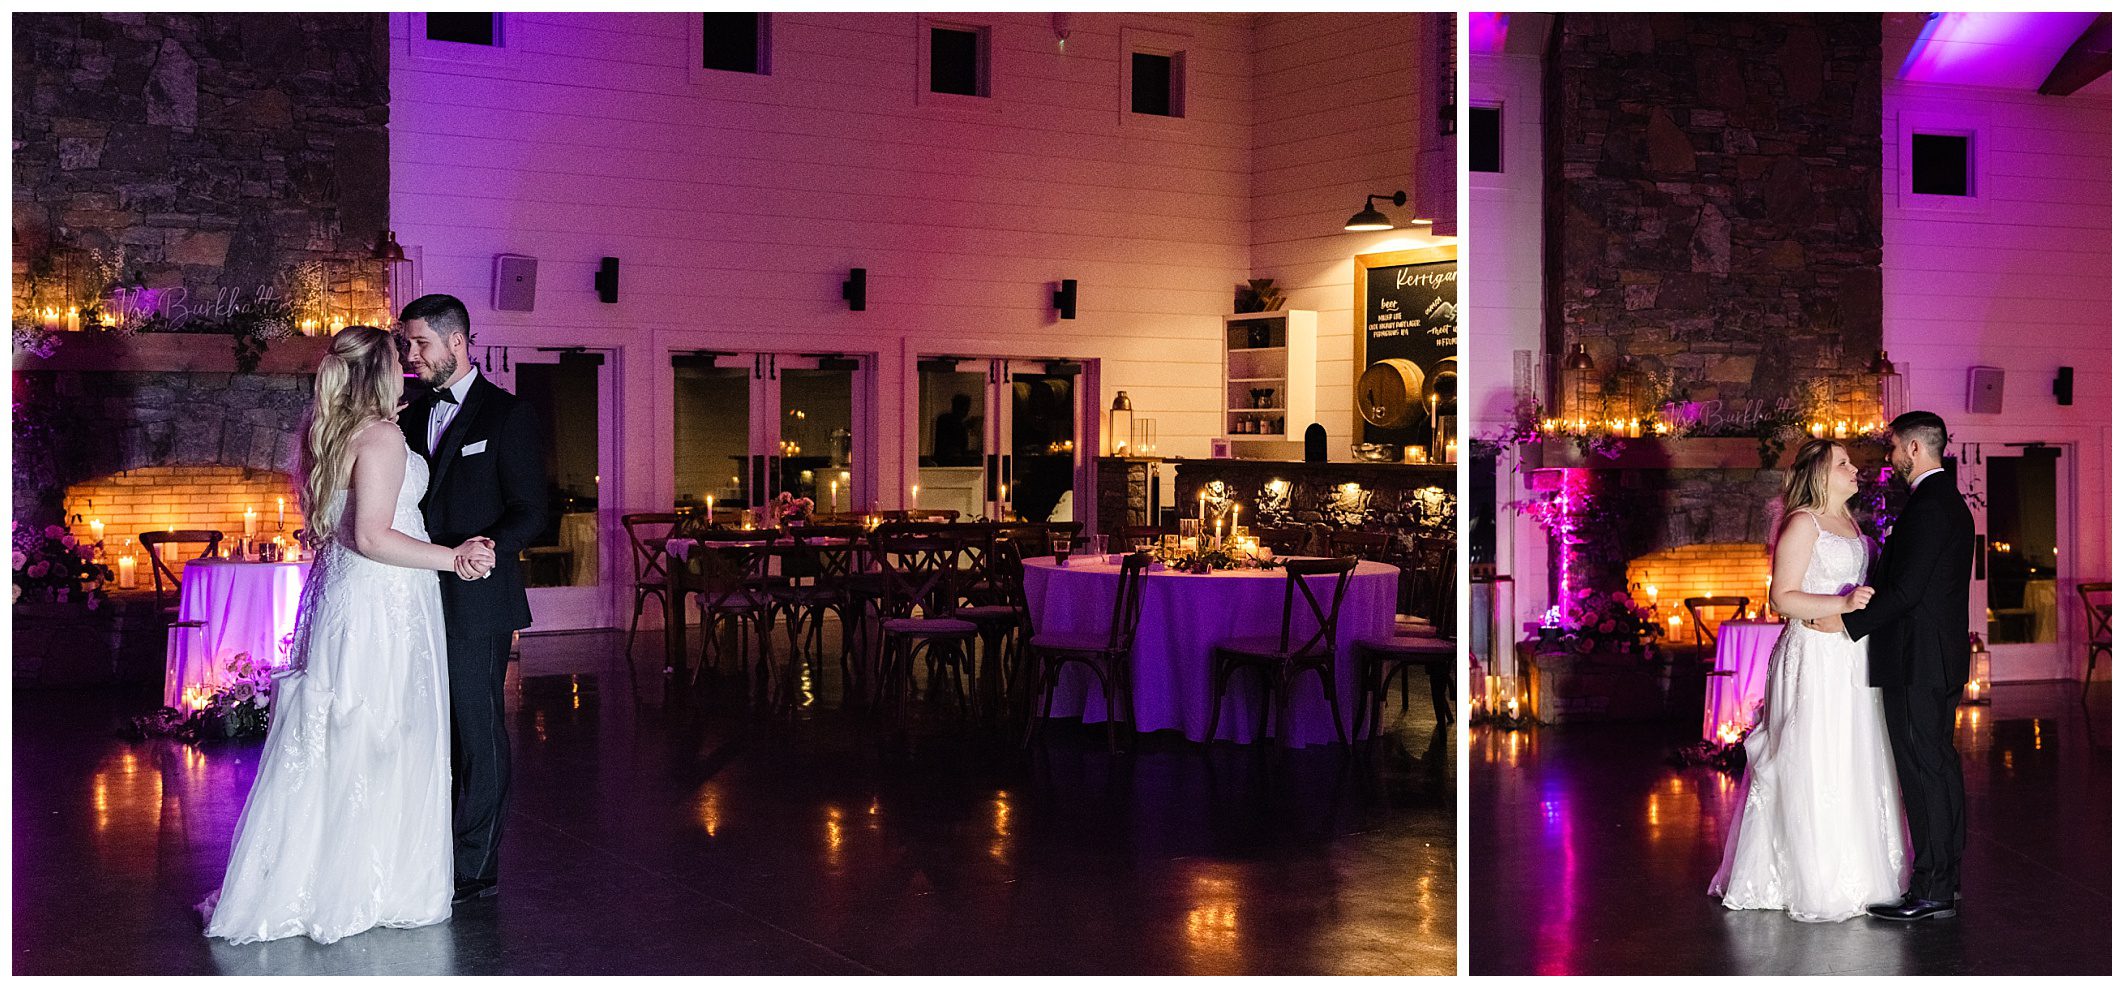 A bride and groom sharing a dance in a dimly lit reception hall at Chestnut Ridge with purple lighting and tables adorned with candles.